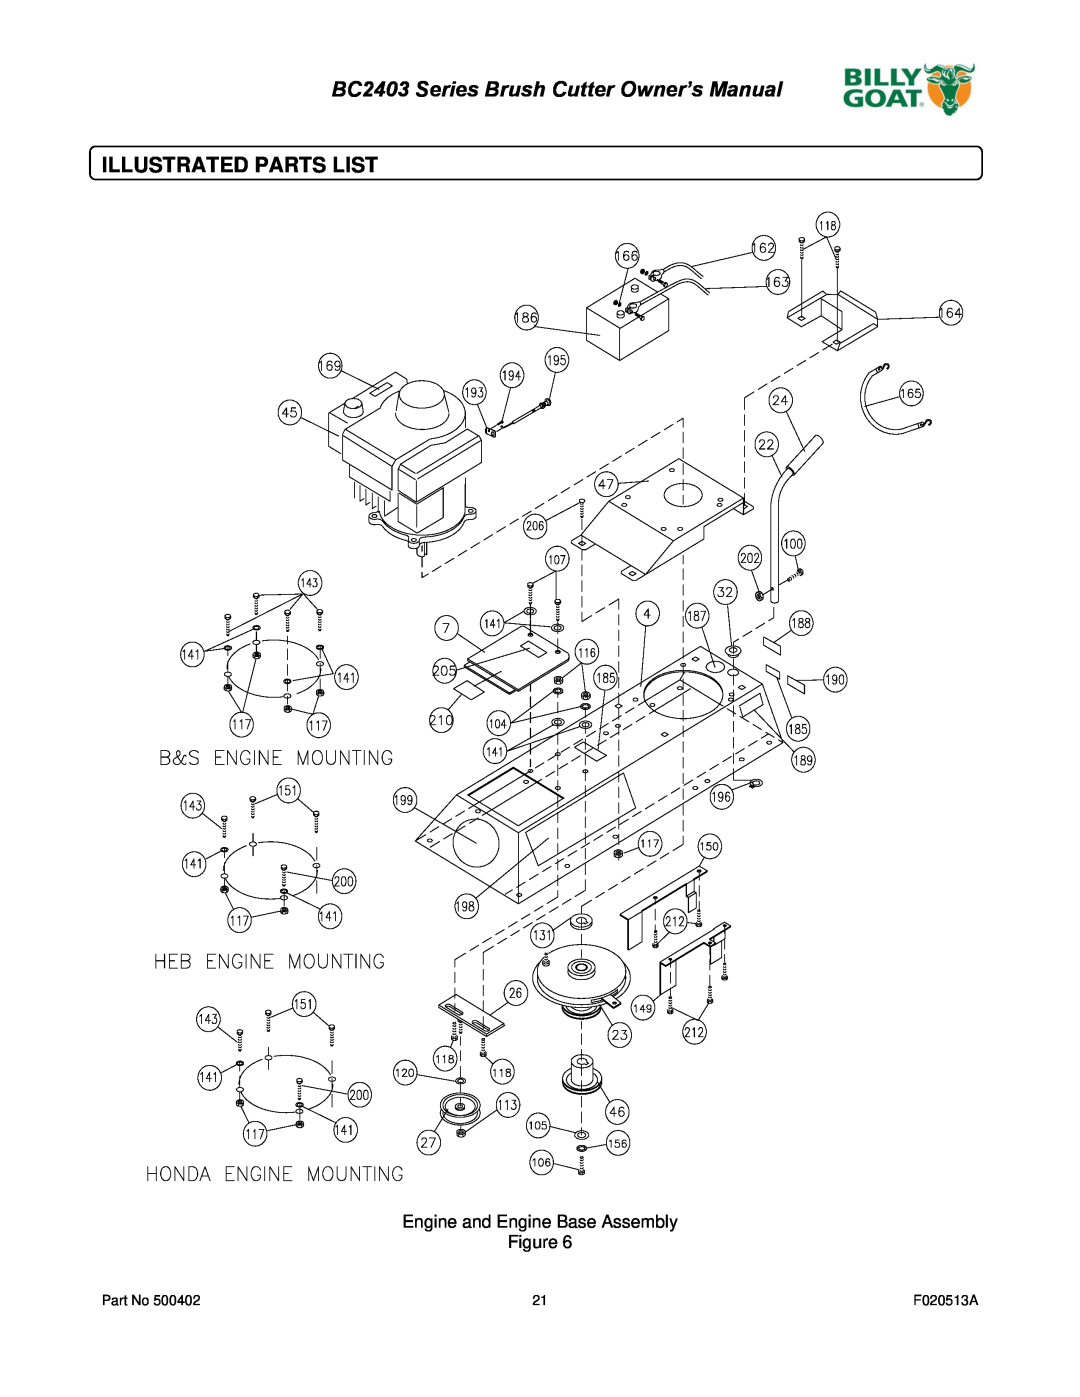 Billy Goat BC2403 owner manual Illustrated Parts List, Engine and Engine Base Assembly, F020513A 